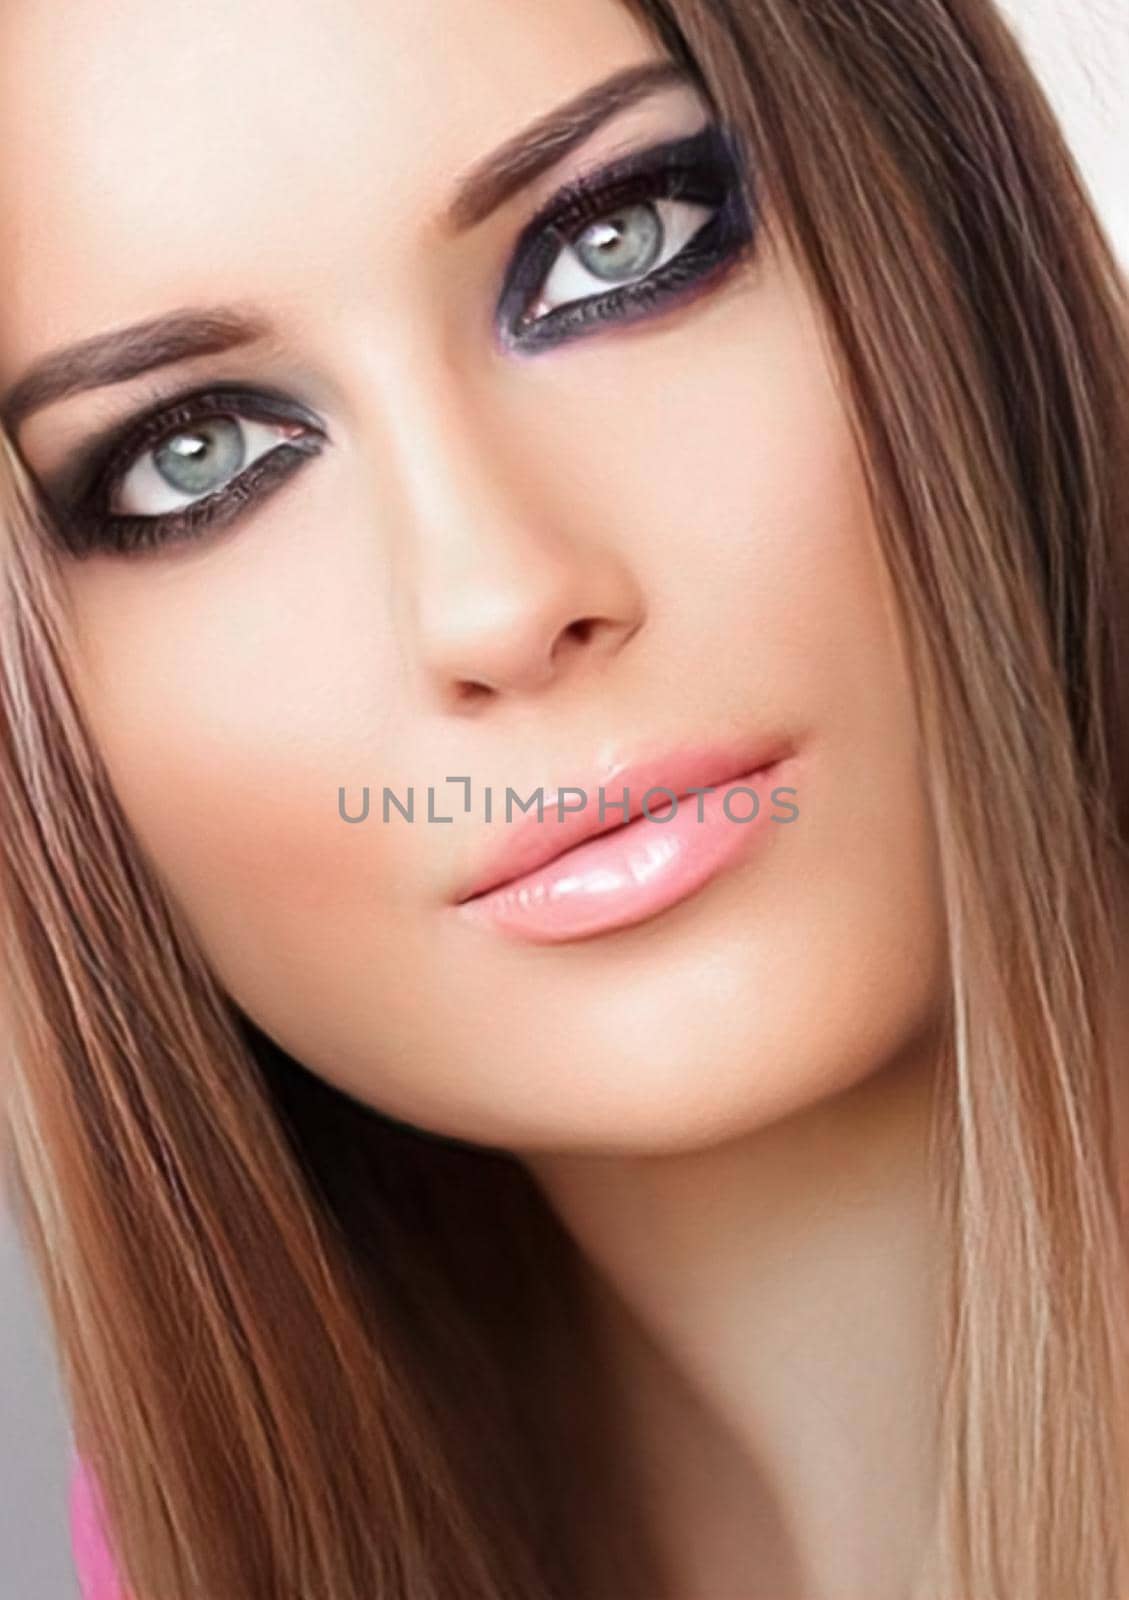 Glamour, beauty and make-up, beautiful woman with smokey eyes makeup, face portrait by Anneleven